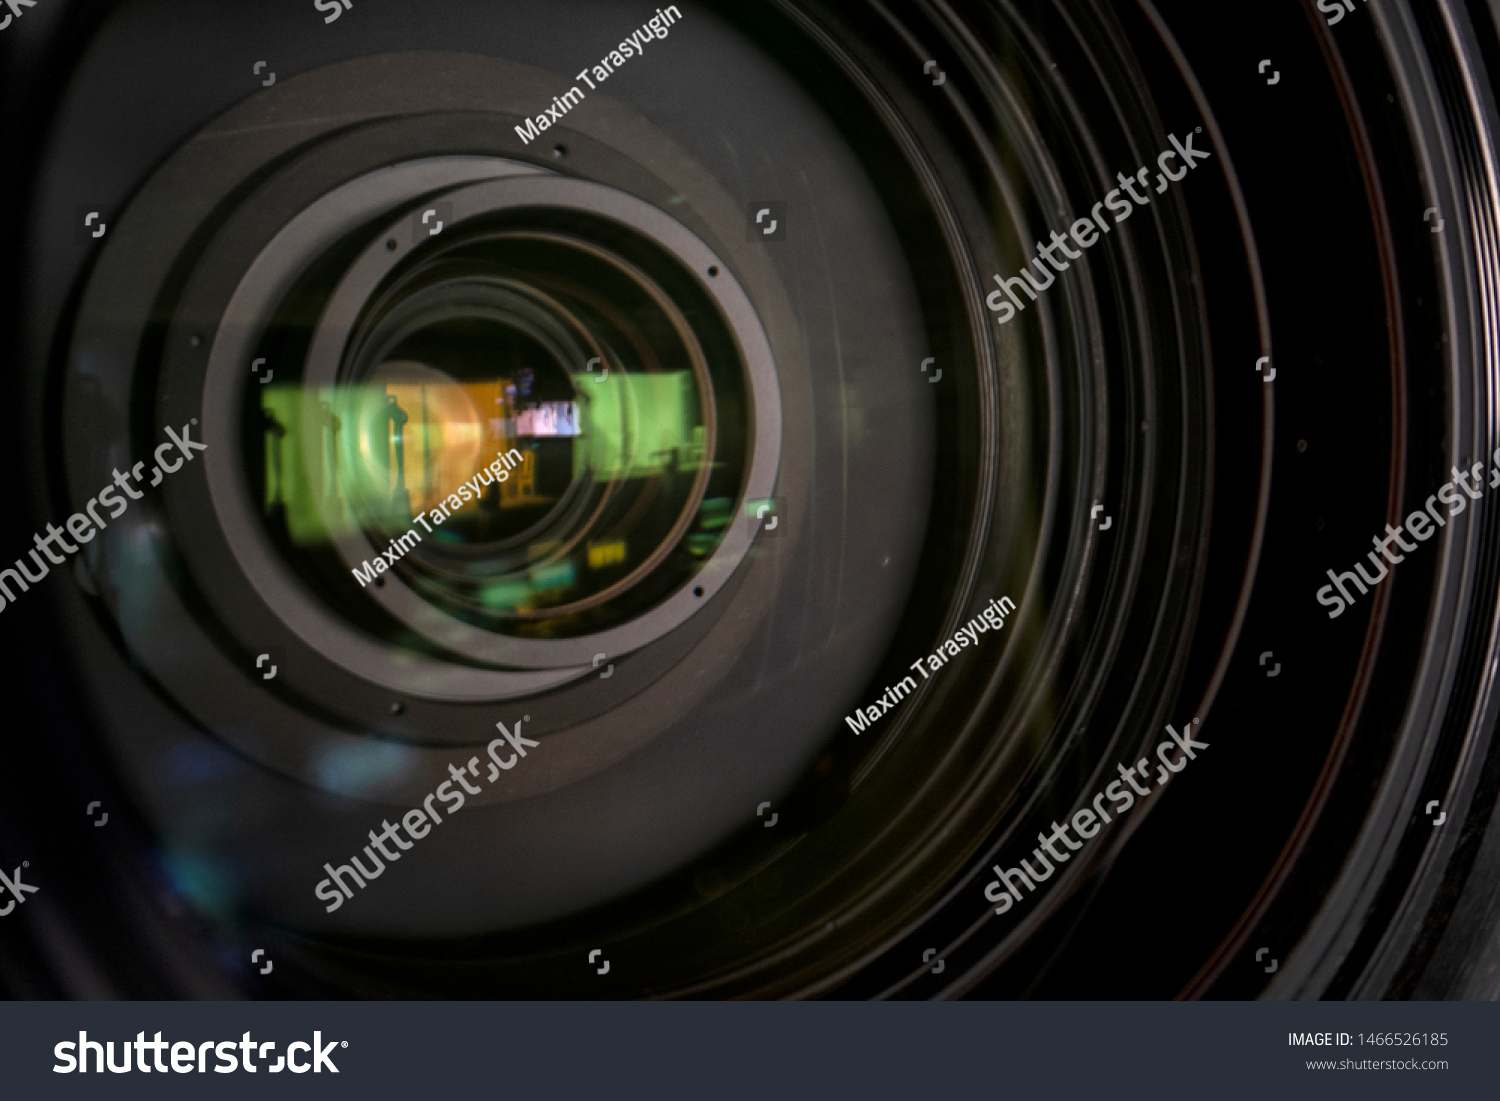 close up of a television lens  on a dark background.
Camera lens,Macro of an iris,Camera - Photographic Equipment, Lens - Optical Instrument, Circle, Metal, Single Object. #1466526185